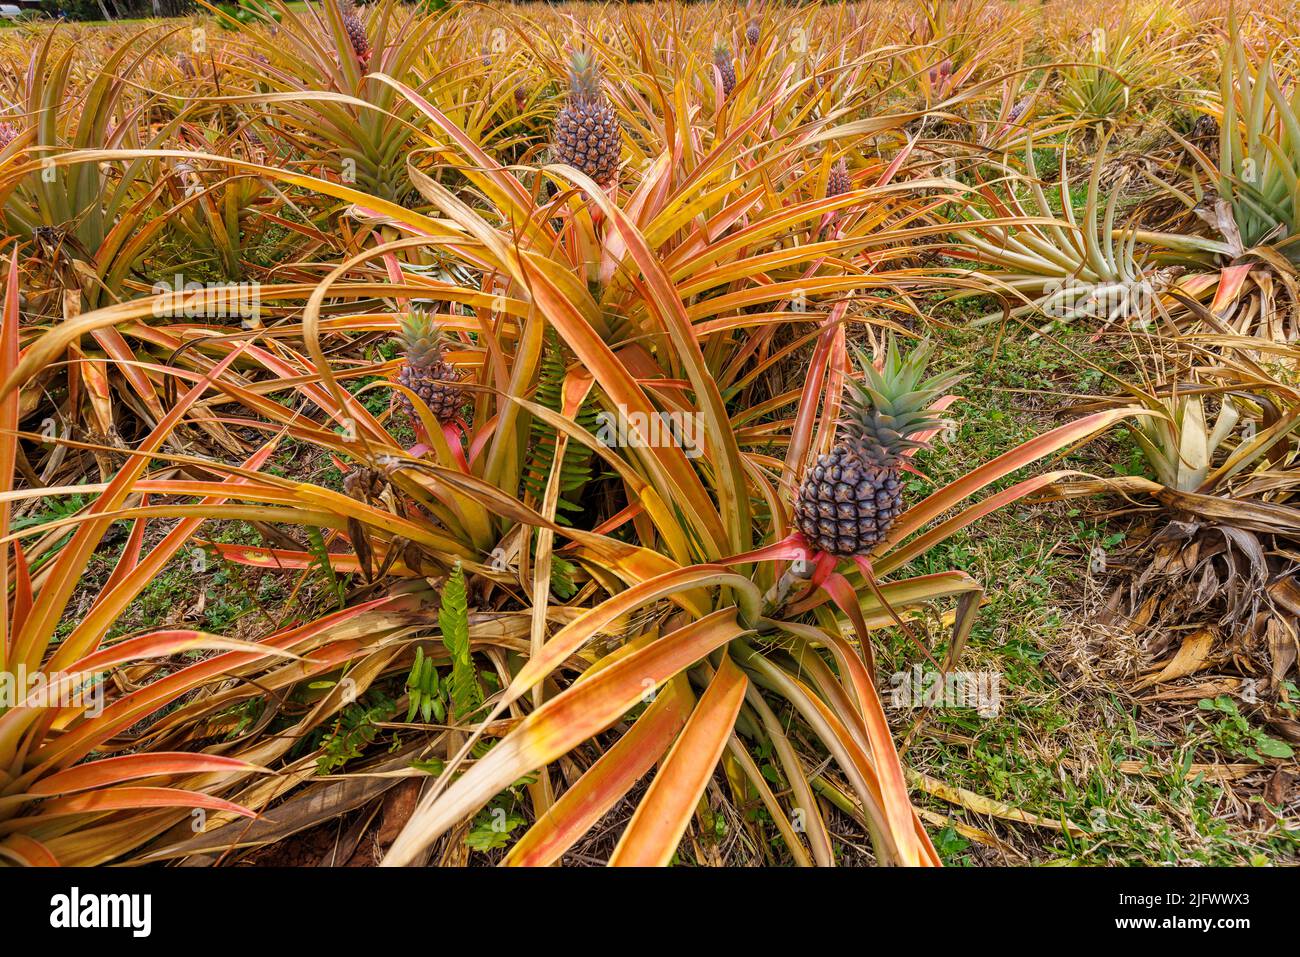 A view of pineapple, Ananas comosus, in a field on Maui, Hawaii, USA. Stock Photo